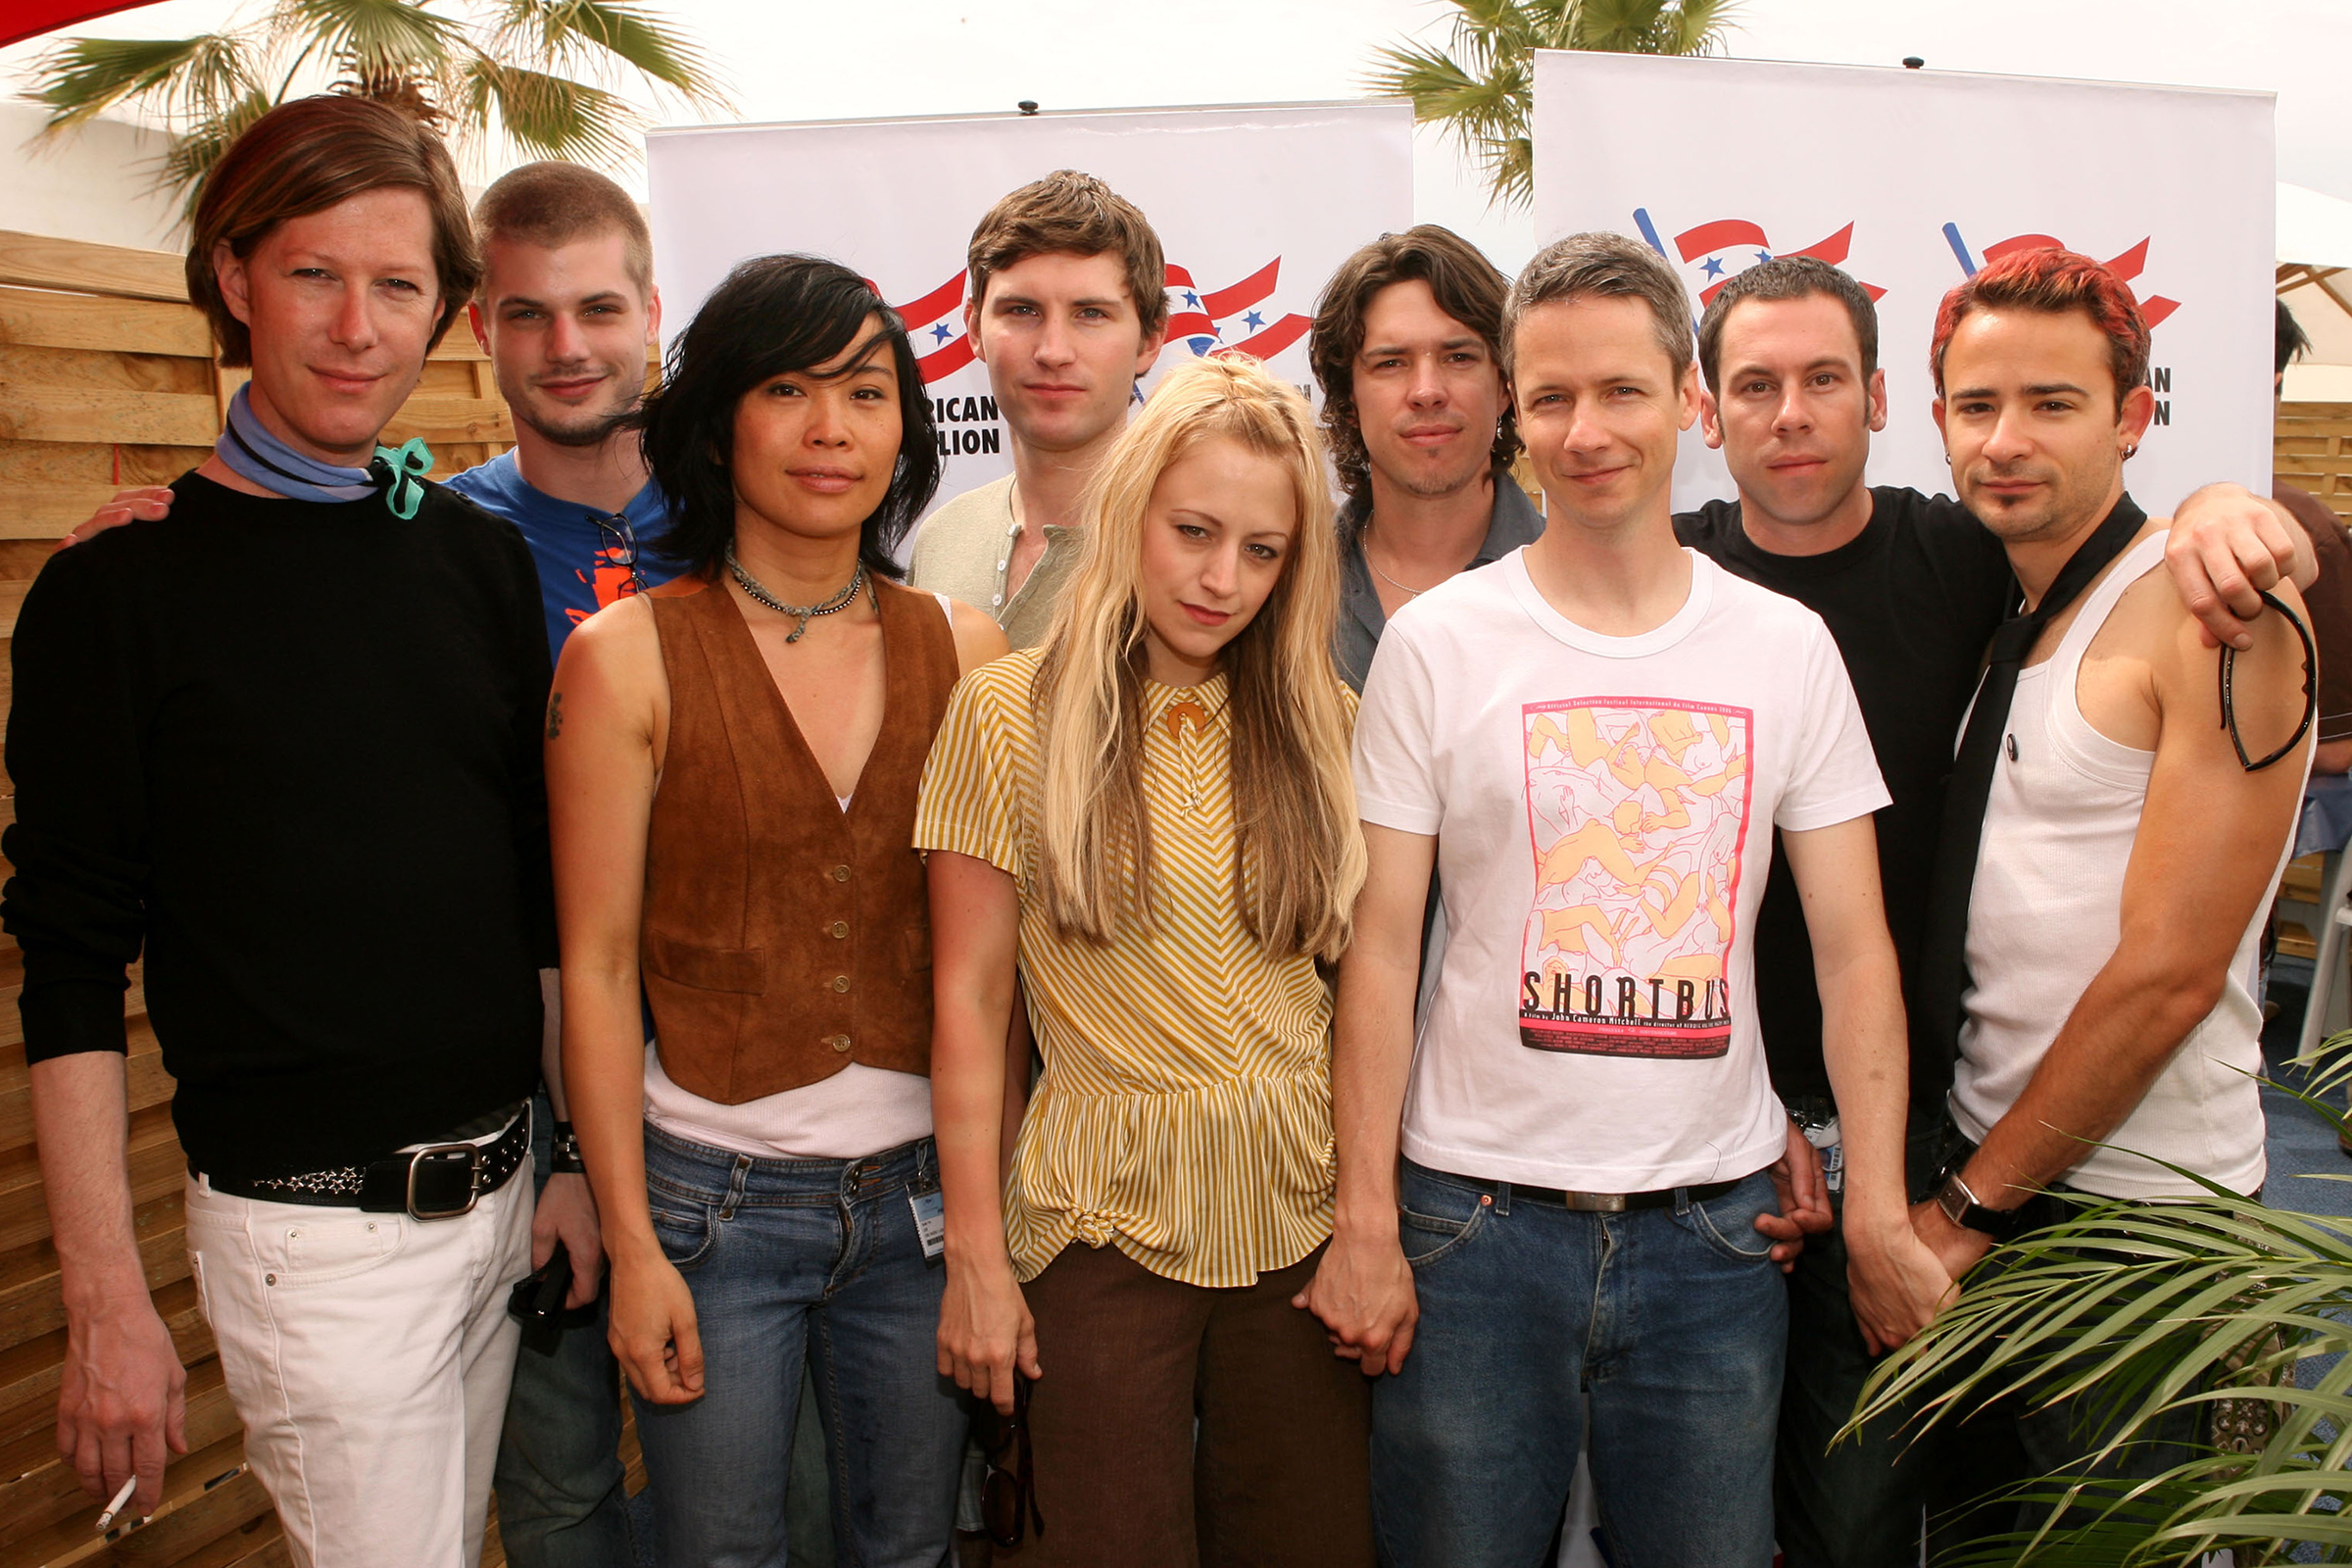 John Cameron Mitchell (third from right) and the cast of "Shortbus" at the 2006 Cannes Film Festival